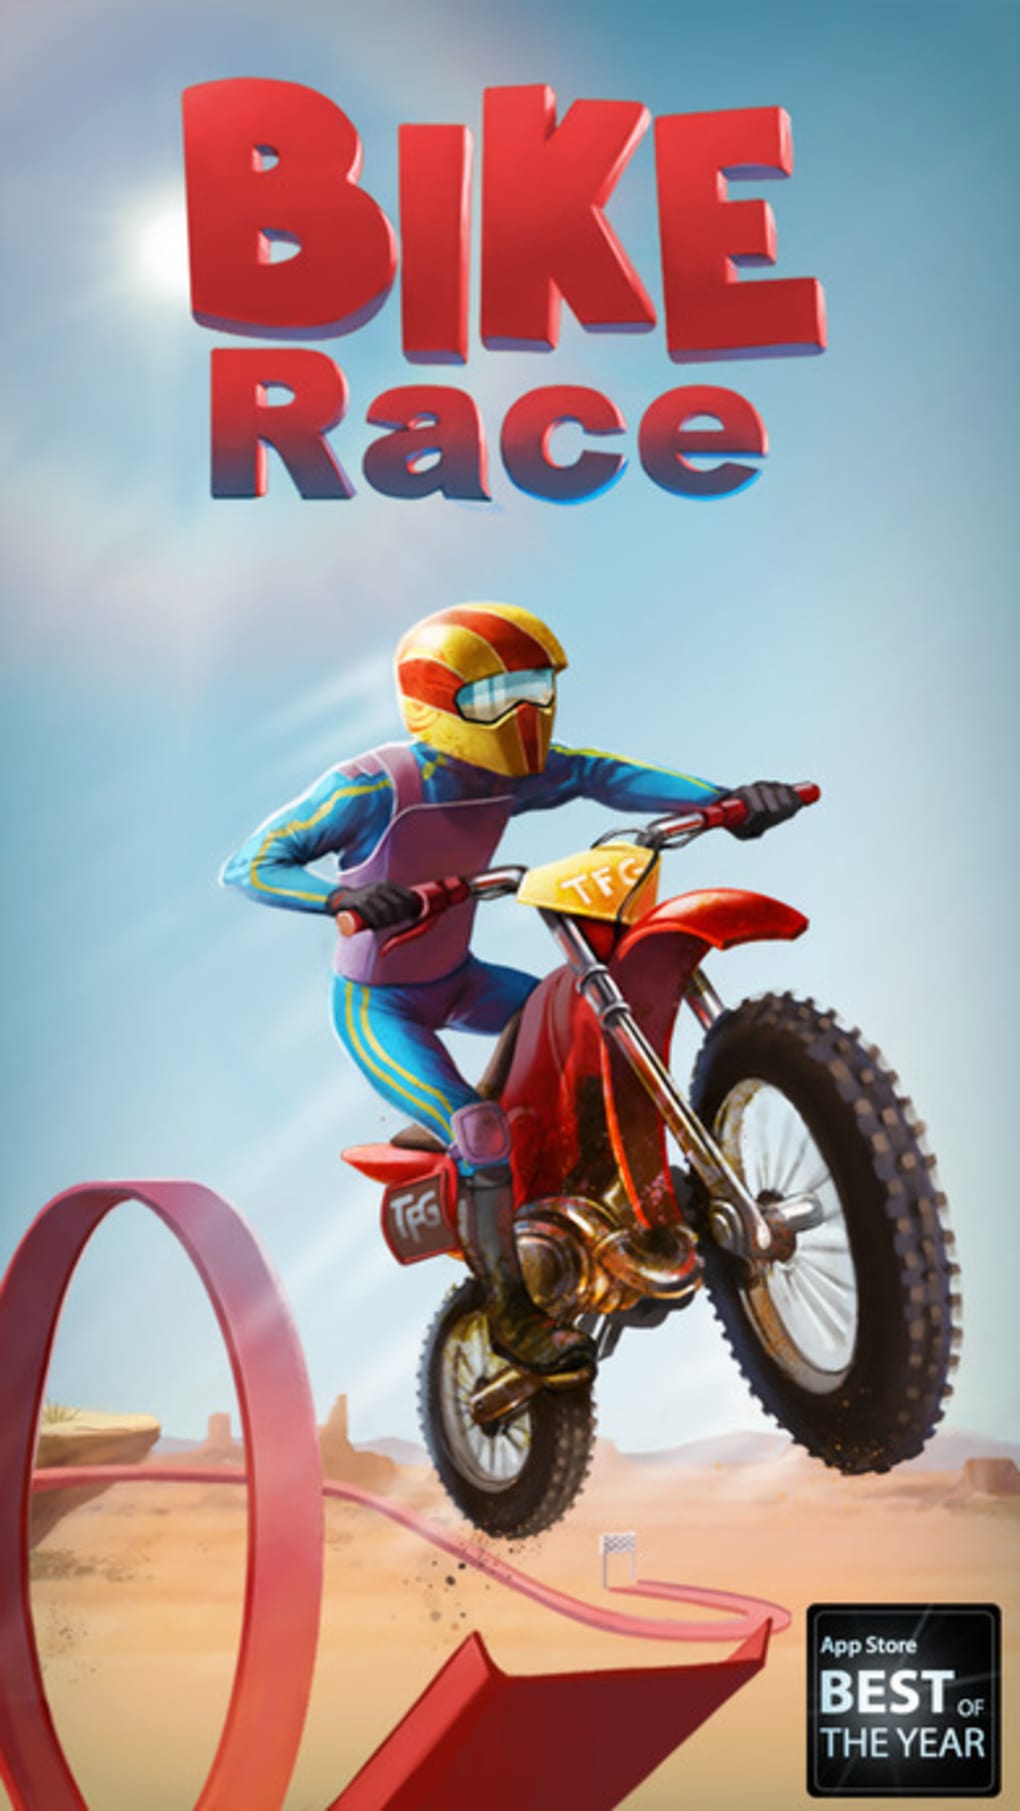 Bike Race Pro - Top Motorcycle Racing Game for iPhone - Download